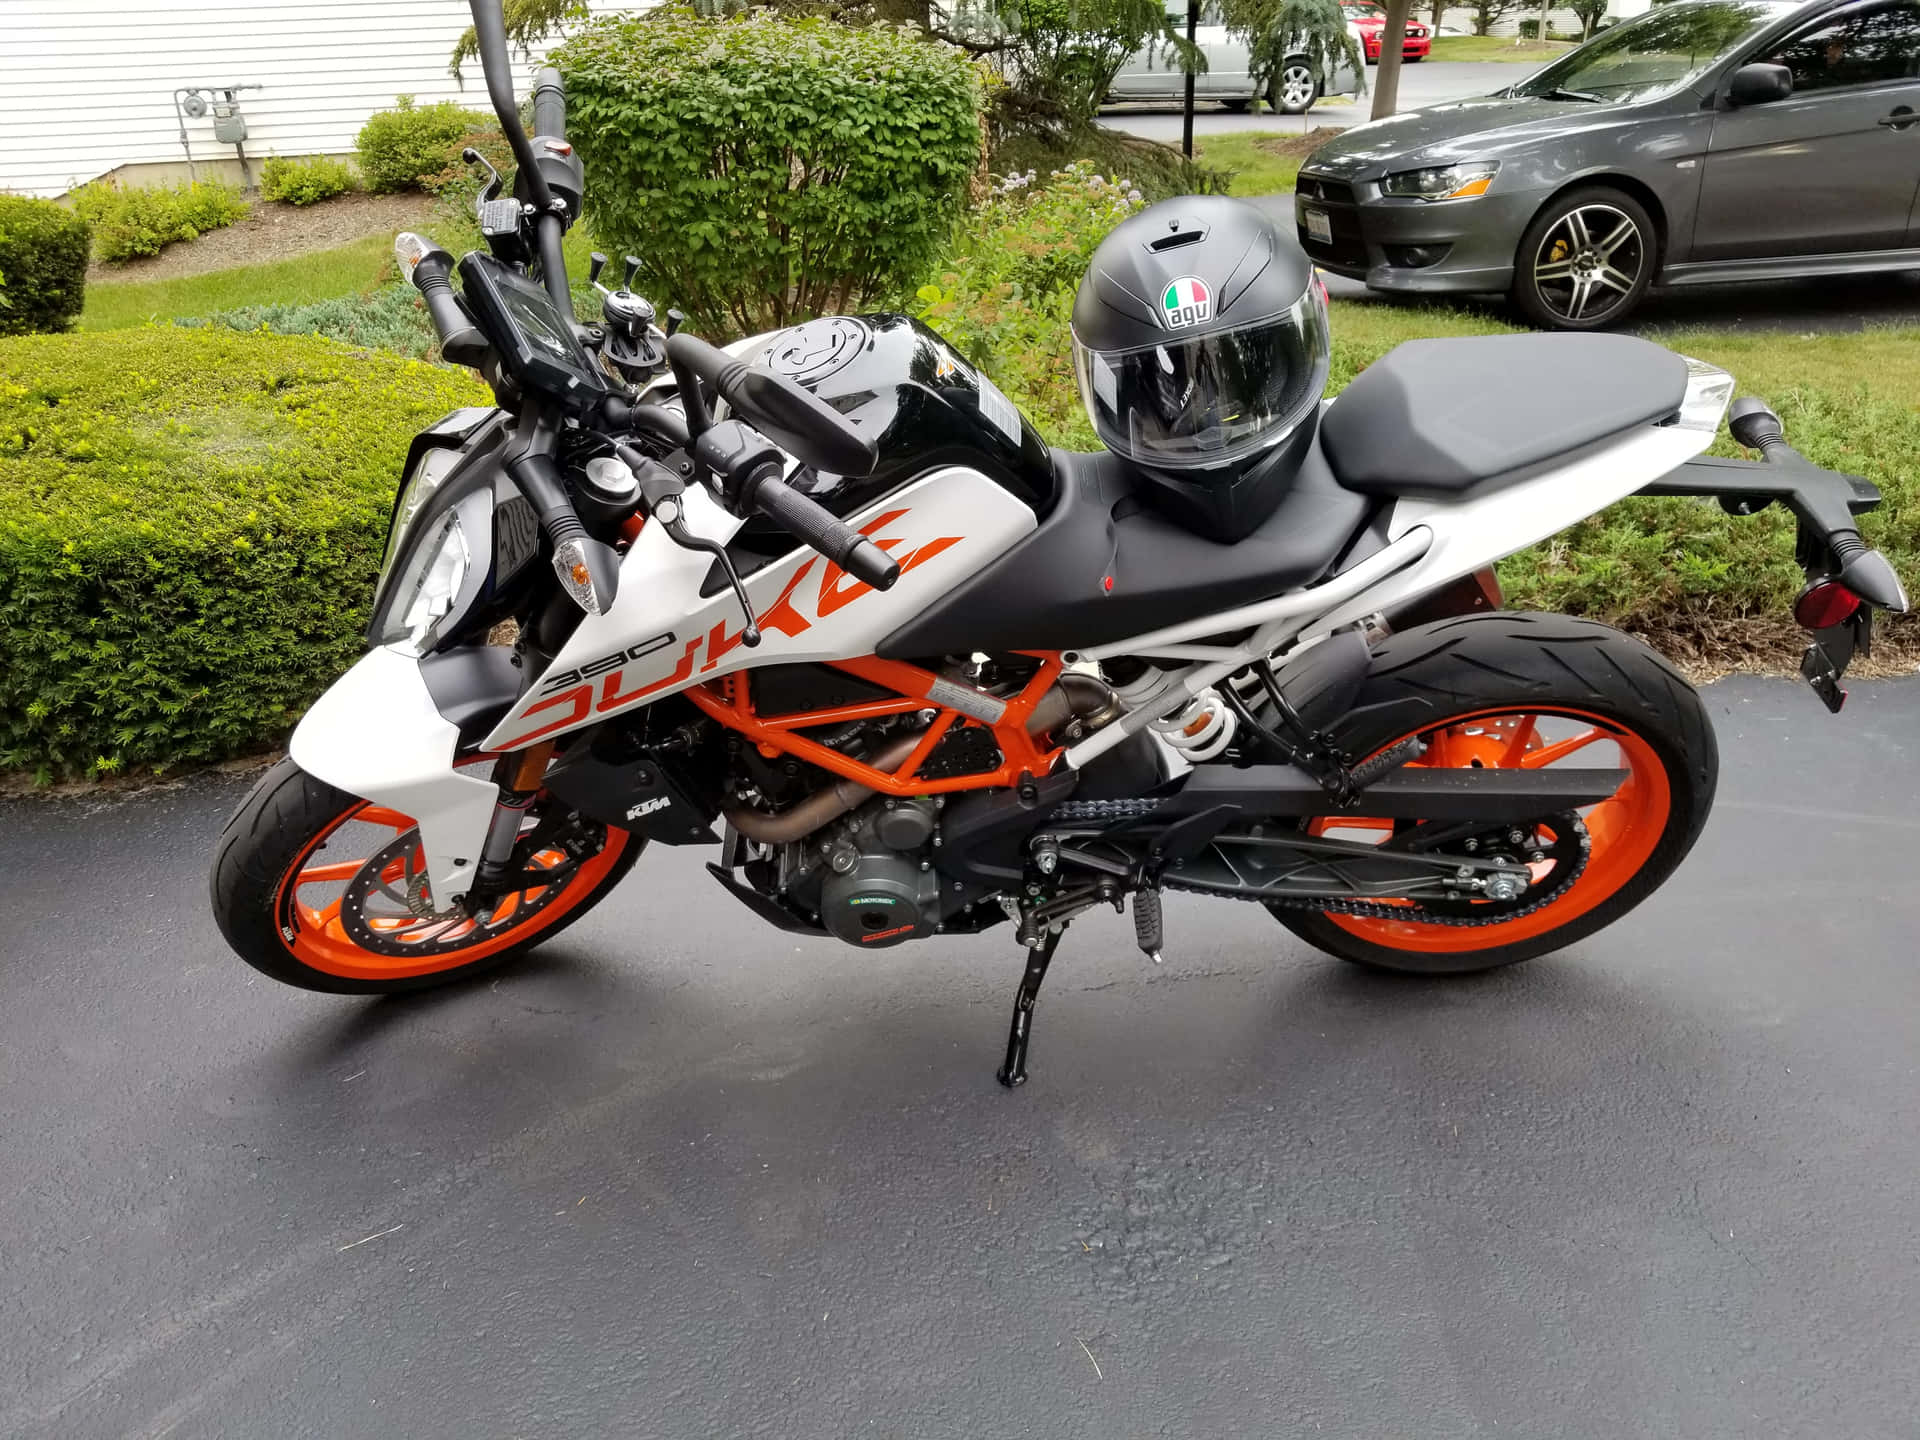 Ktm Duke 390 Motorcycle With Helmet Picture